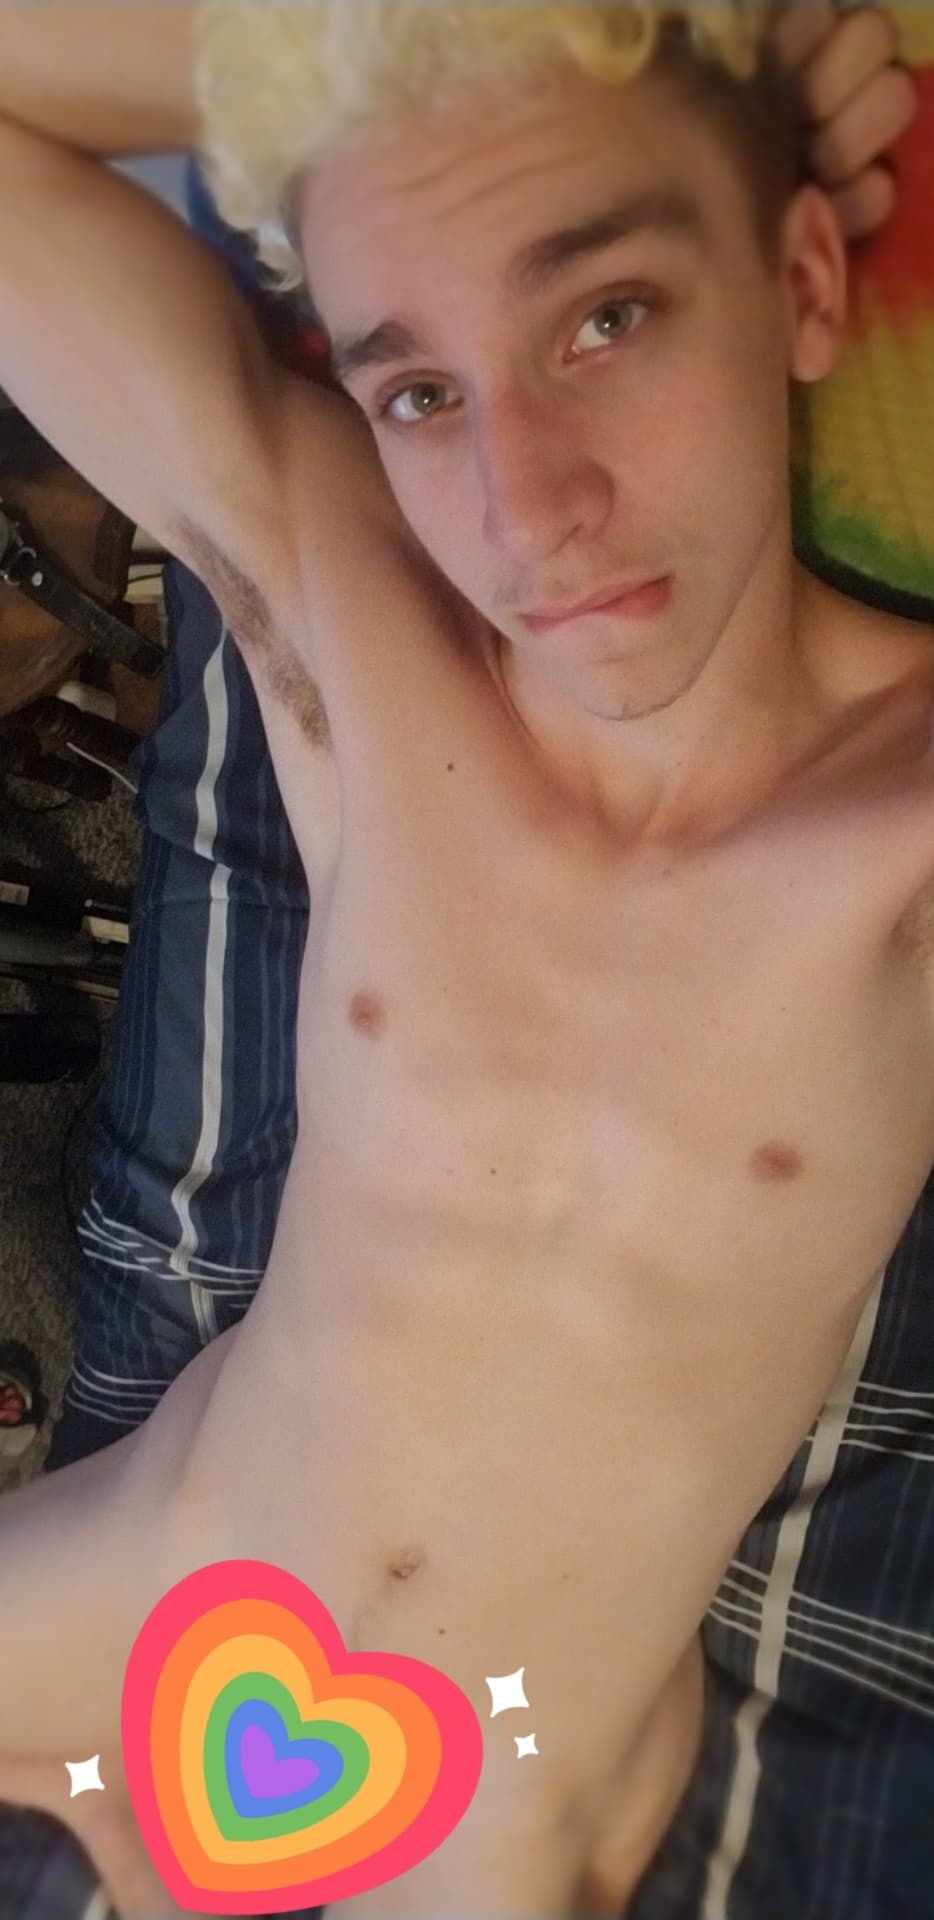 I’m online boys and girls, cum check out my new haircut live :P cum and hang out with me and watch me cum as many times as I can. :P https://chaturbate.com/b/nickpain0717/